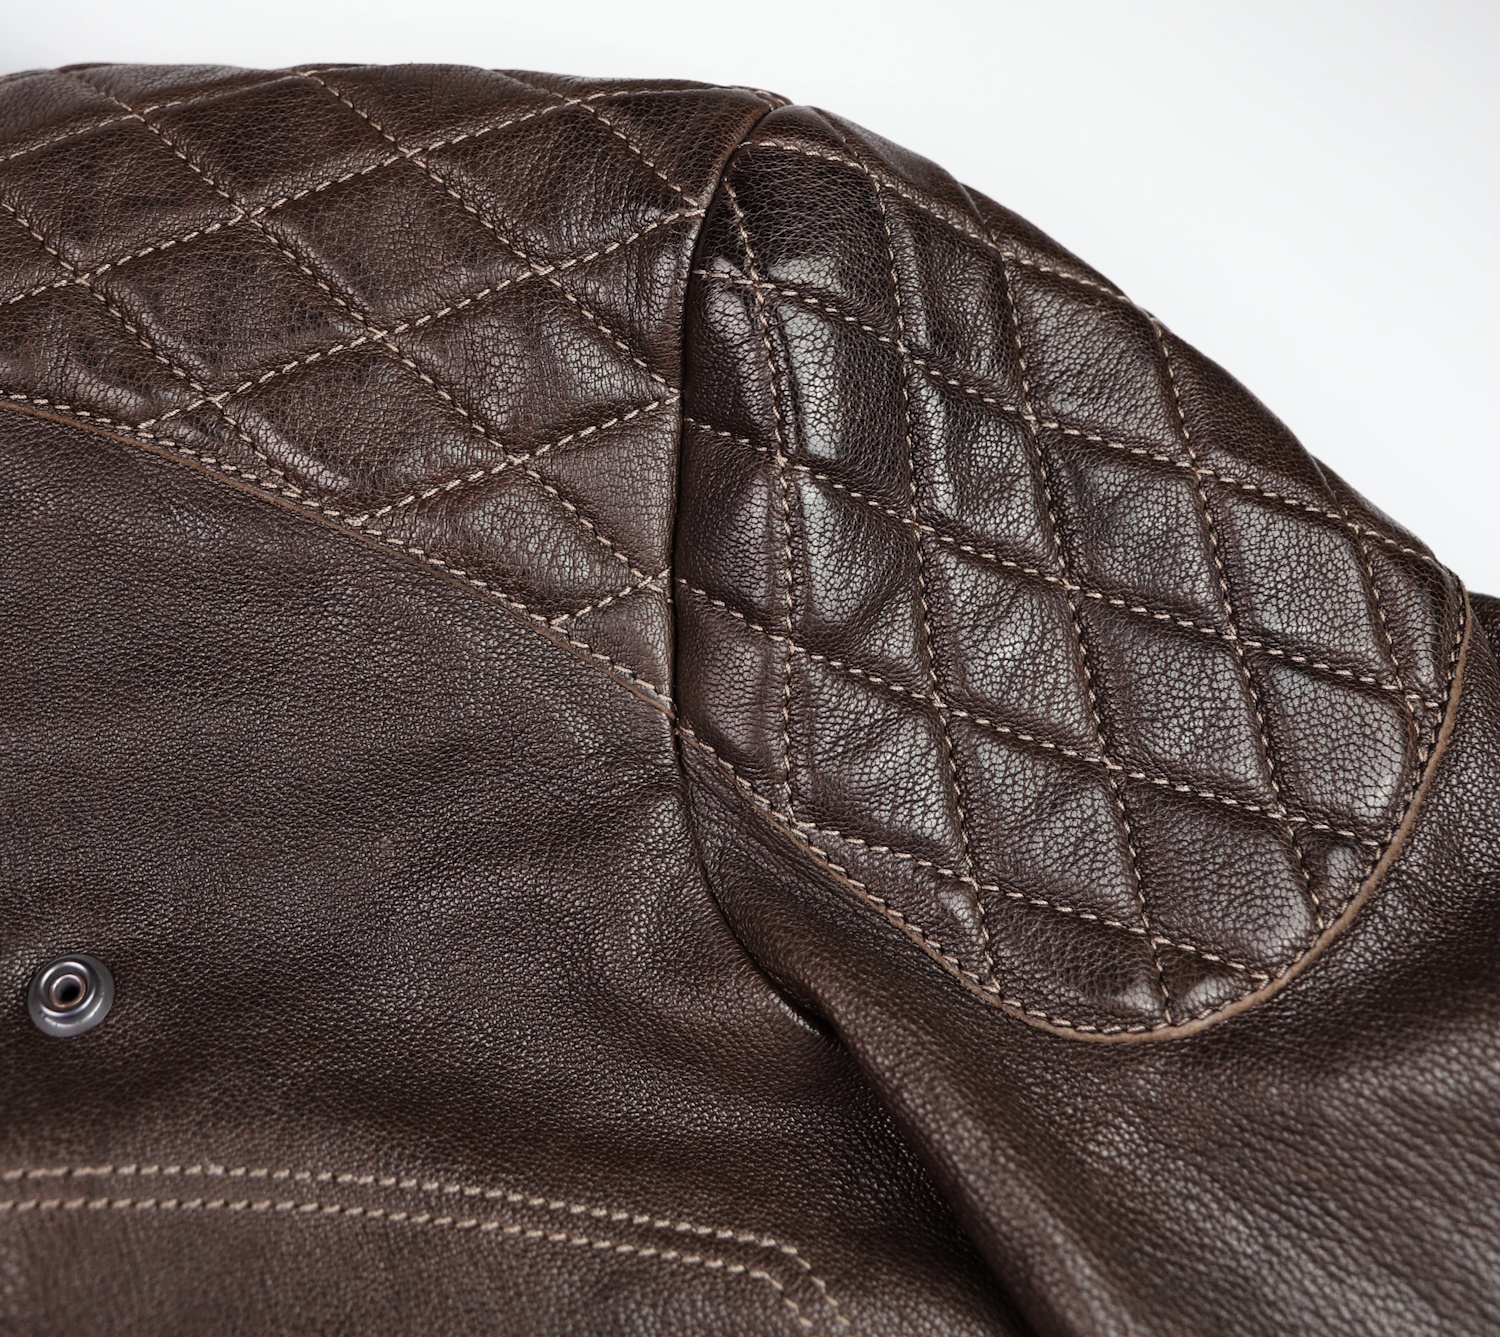 Thedi Maximos Cafe Racer Brown Calabria Goatskin Large shoulder quilting.jpg